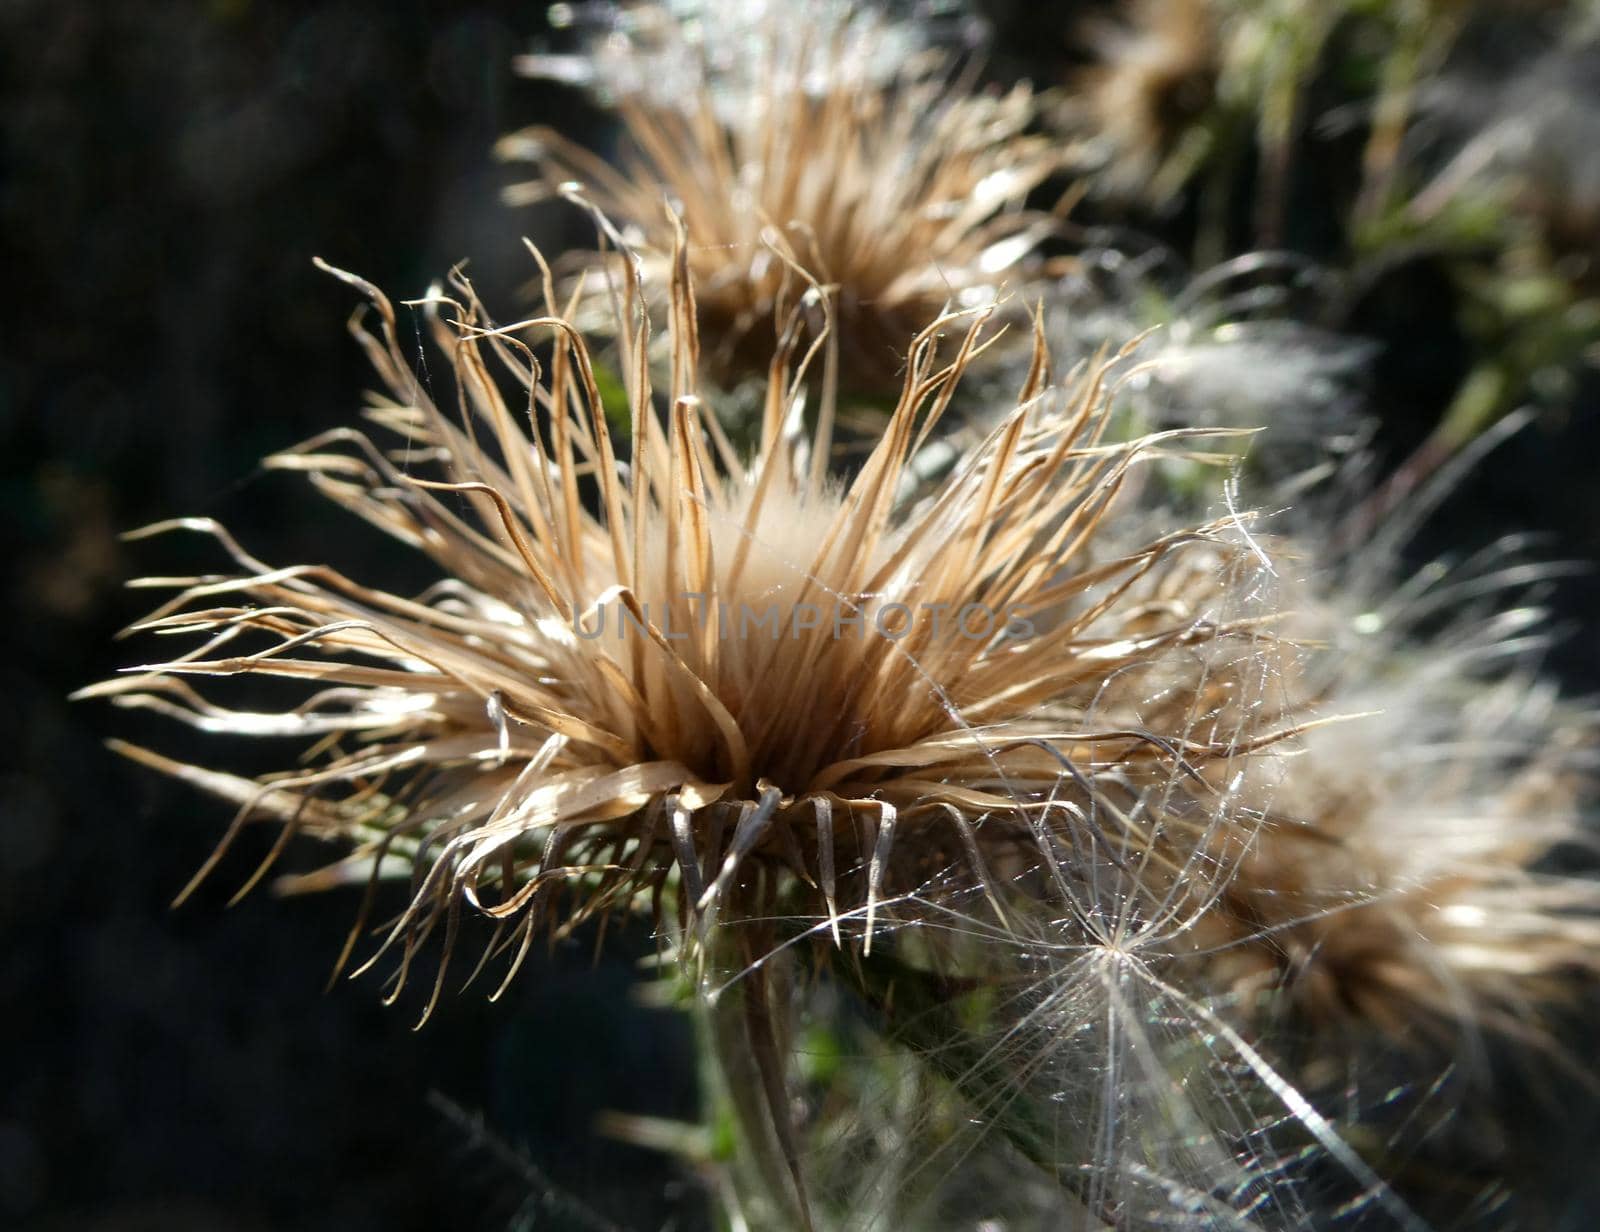 Close-up of the seed head of a common thistle against a dark background